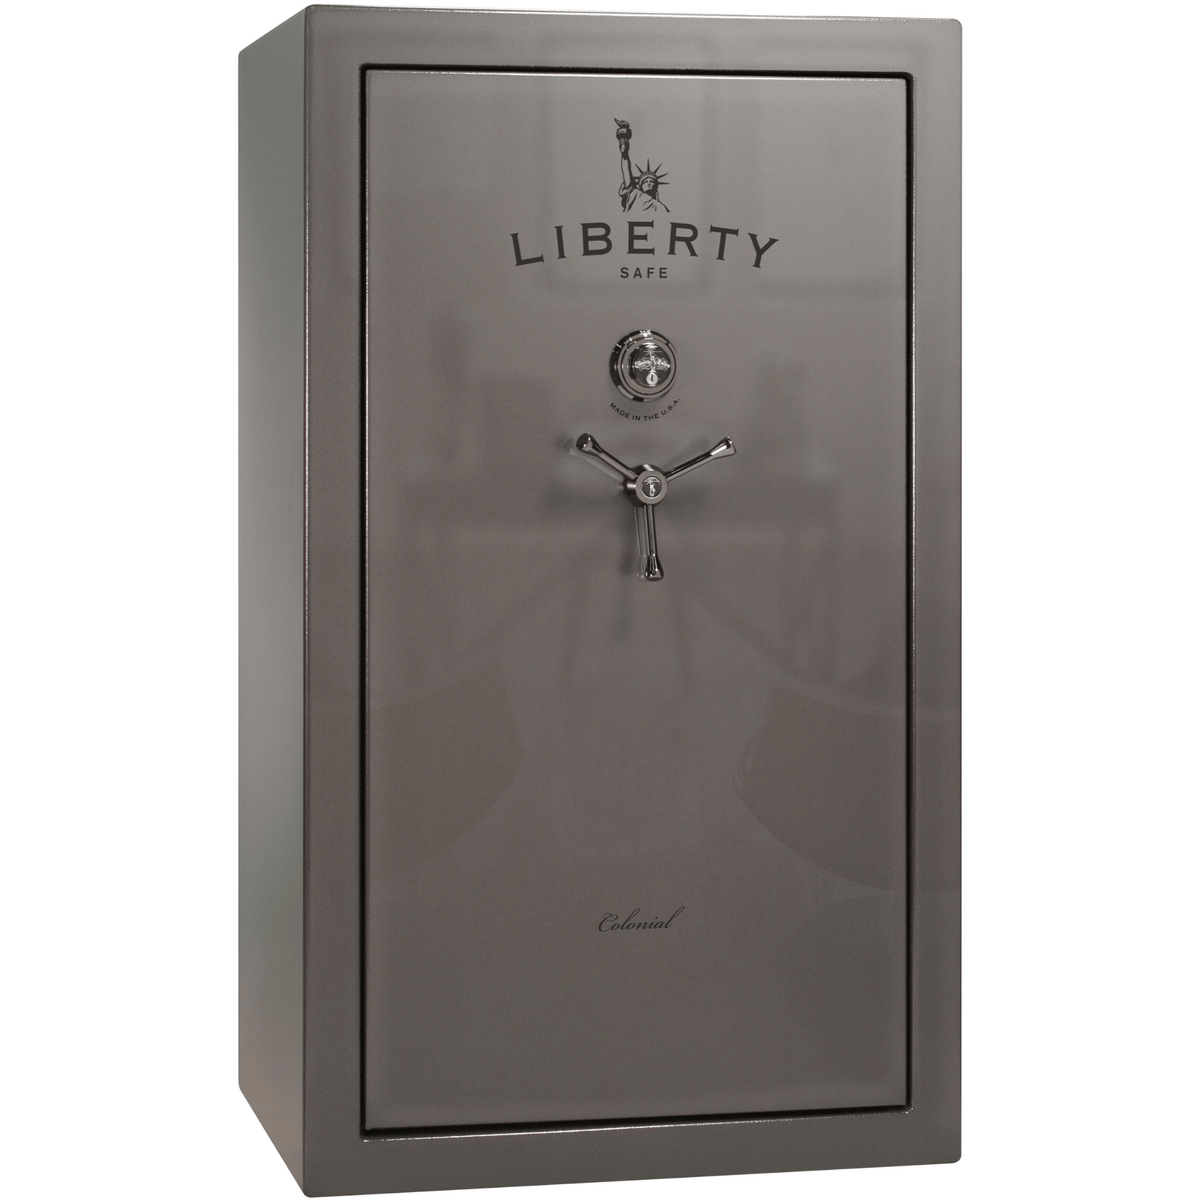 Liberty Colonial 30 Safe in Gray Gloss with Black Chrome Mechanical Lock.